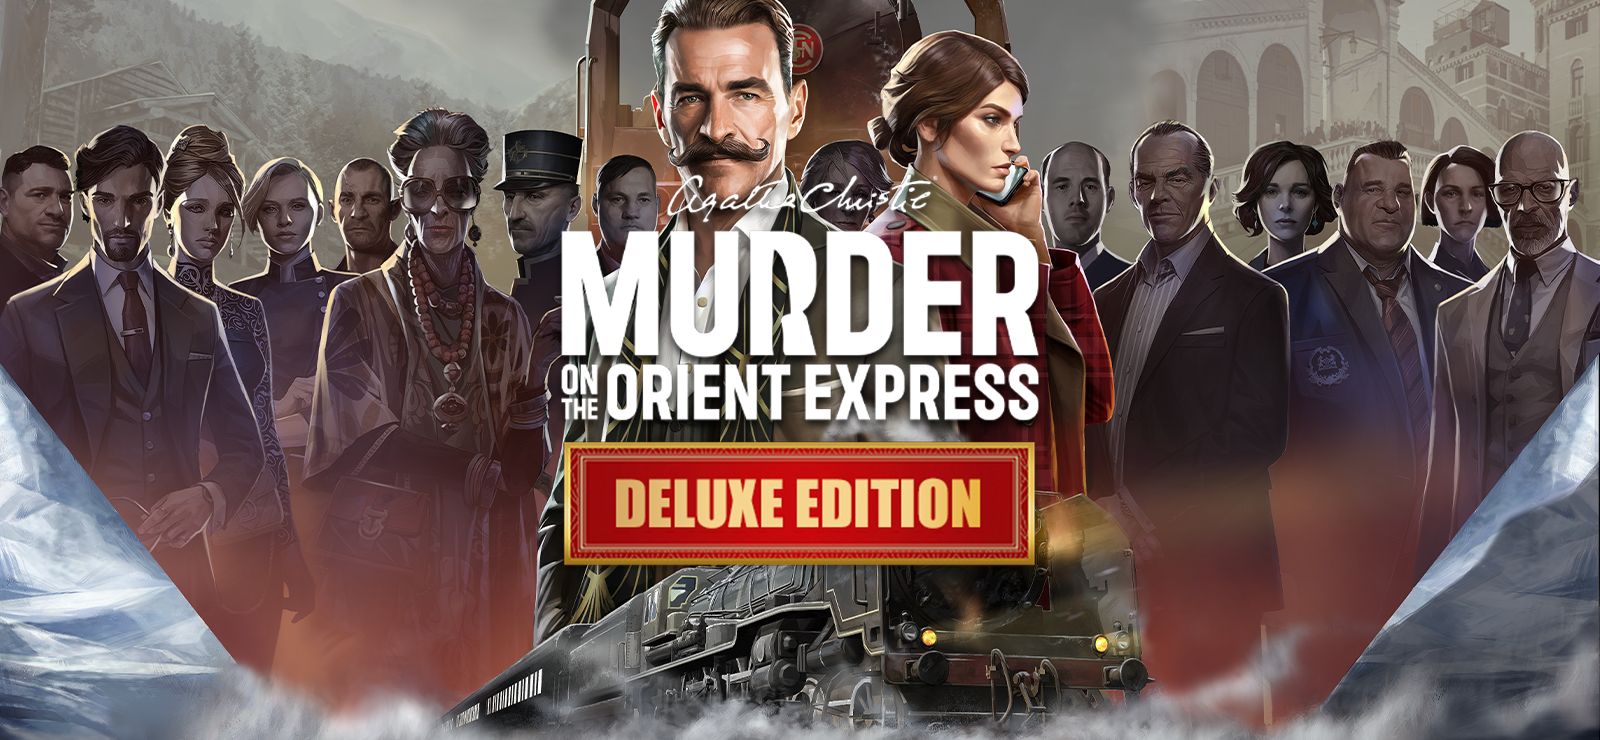 Agatha Christie - Murder On The Orient Express - Deluxe Edition